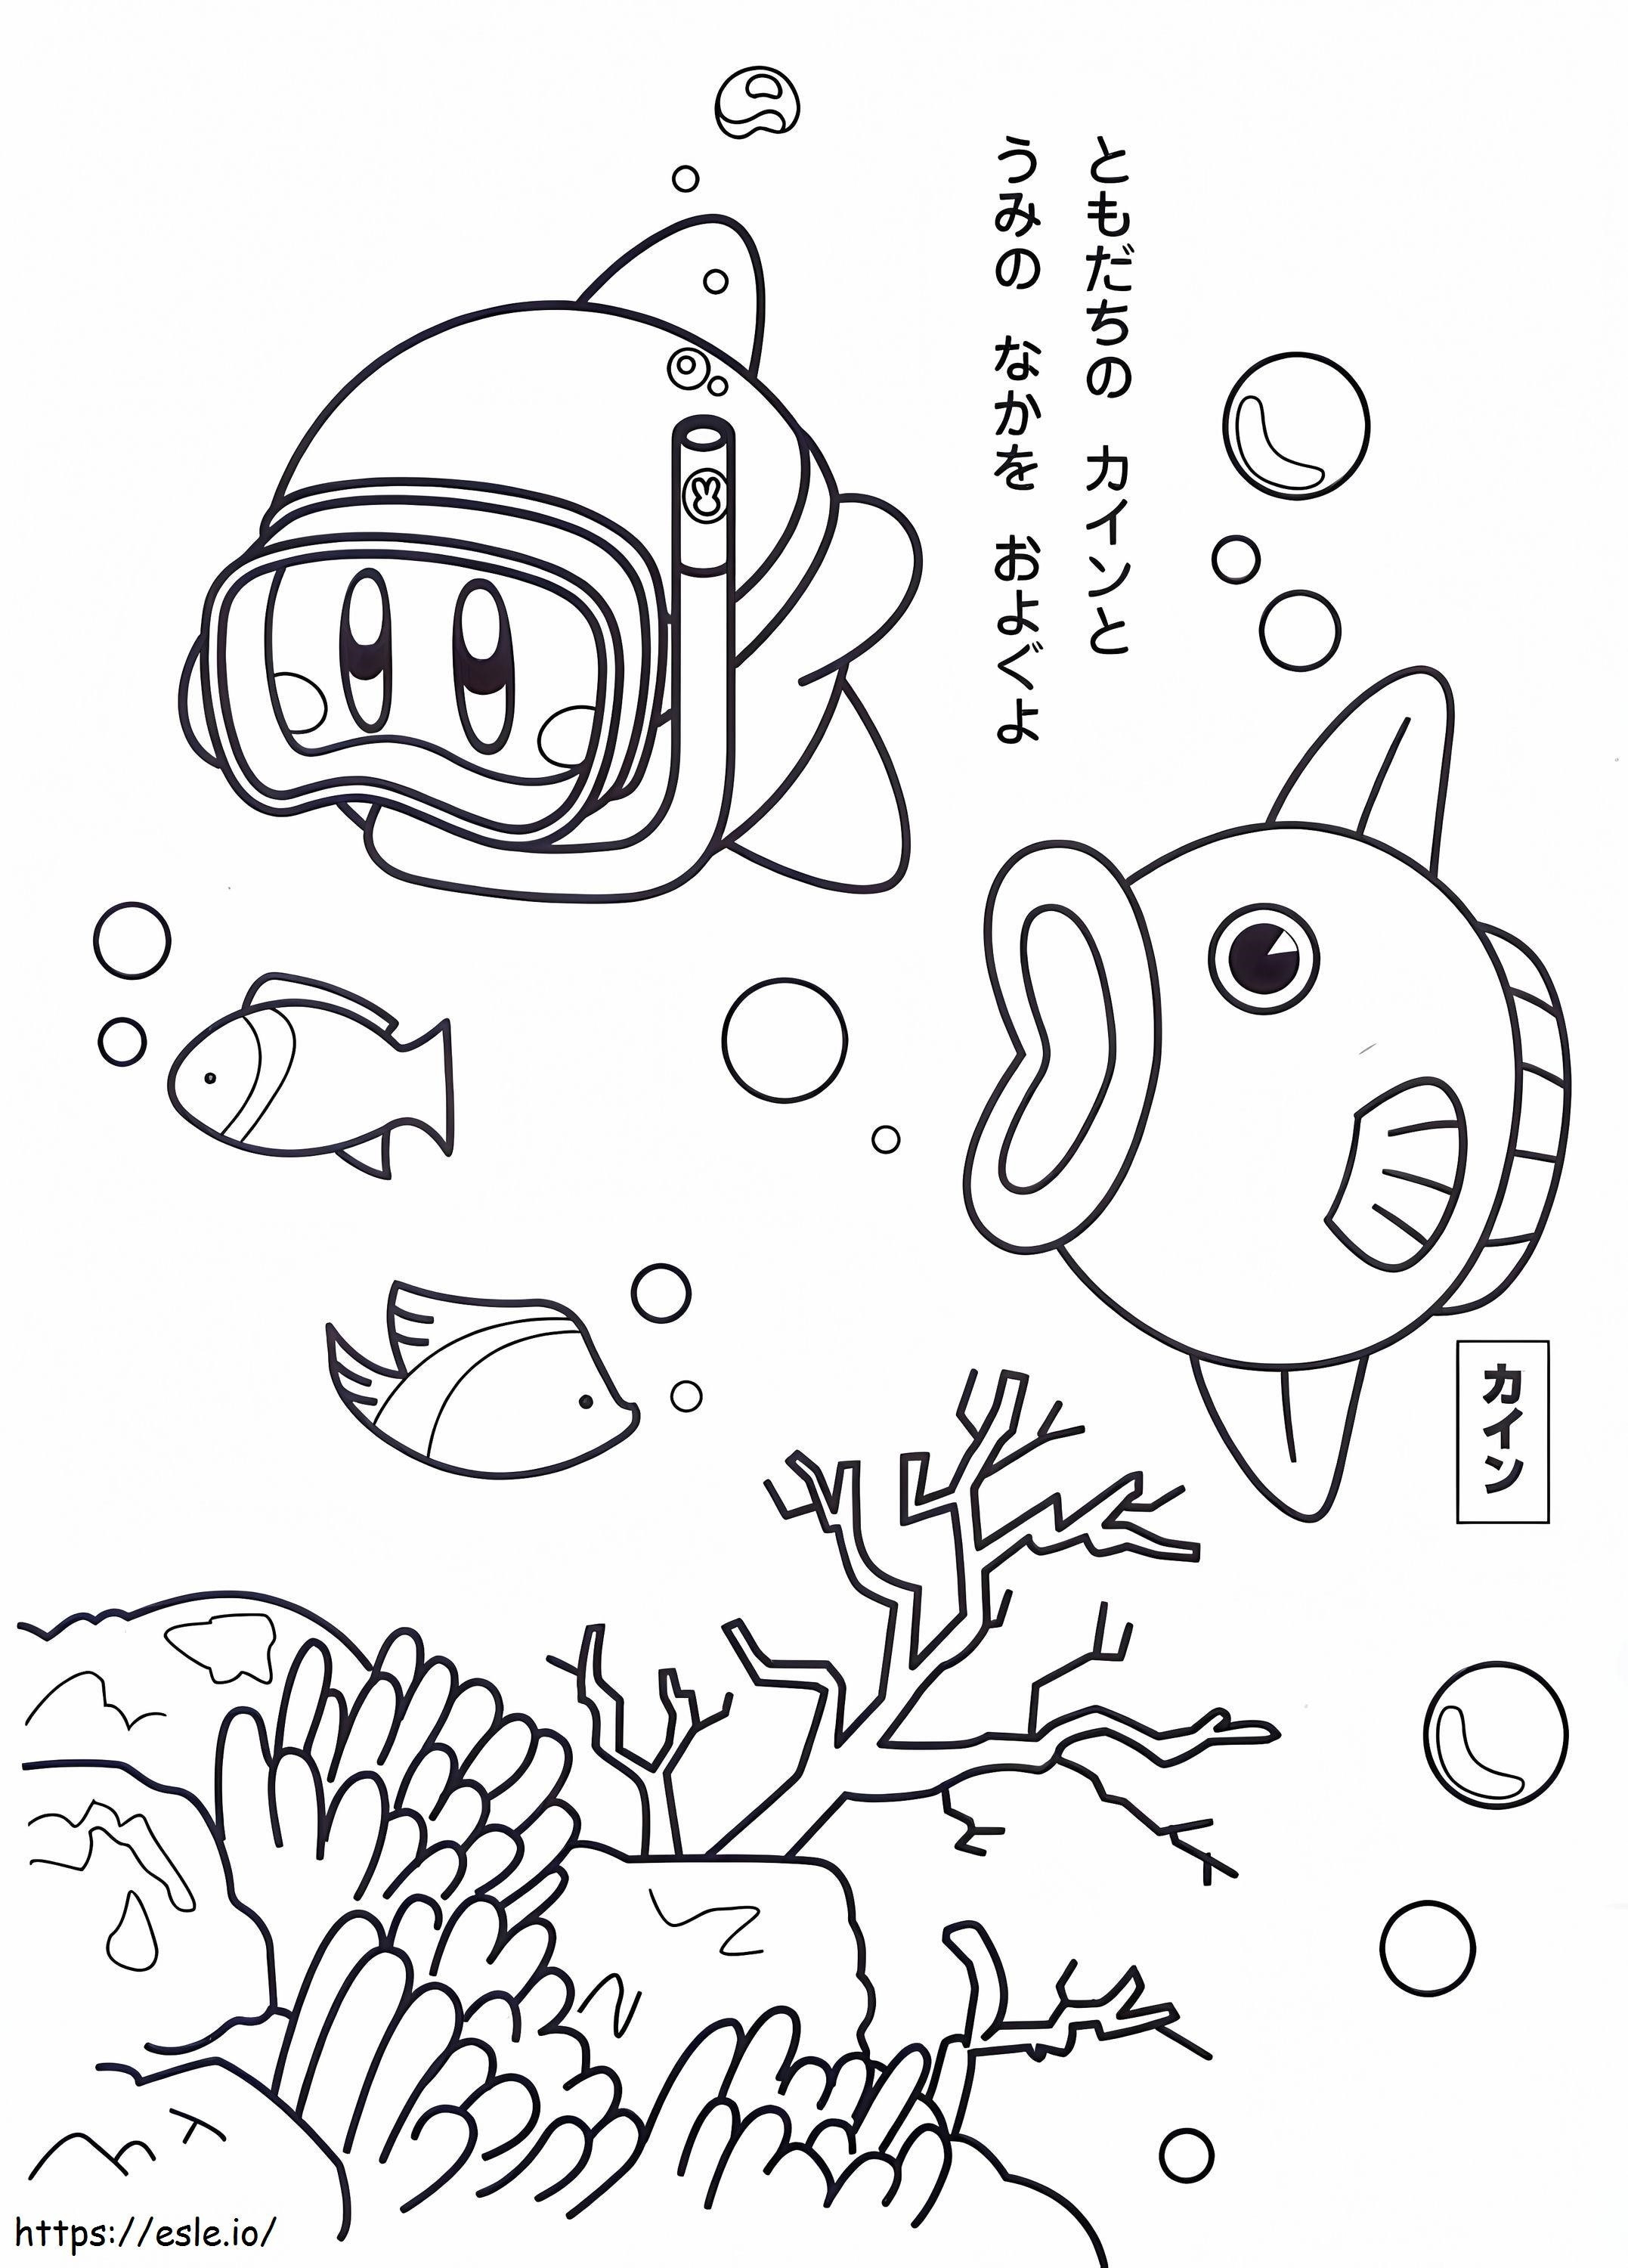 Kirby Sous Locean coloring page